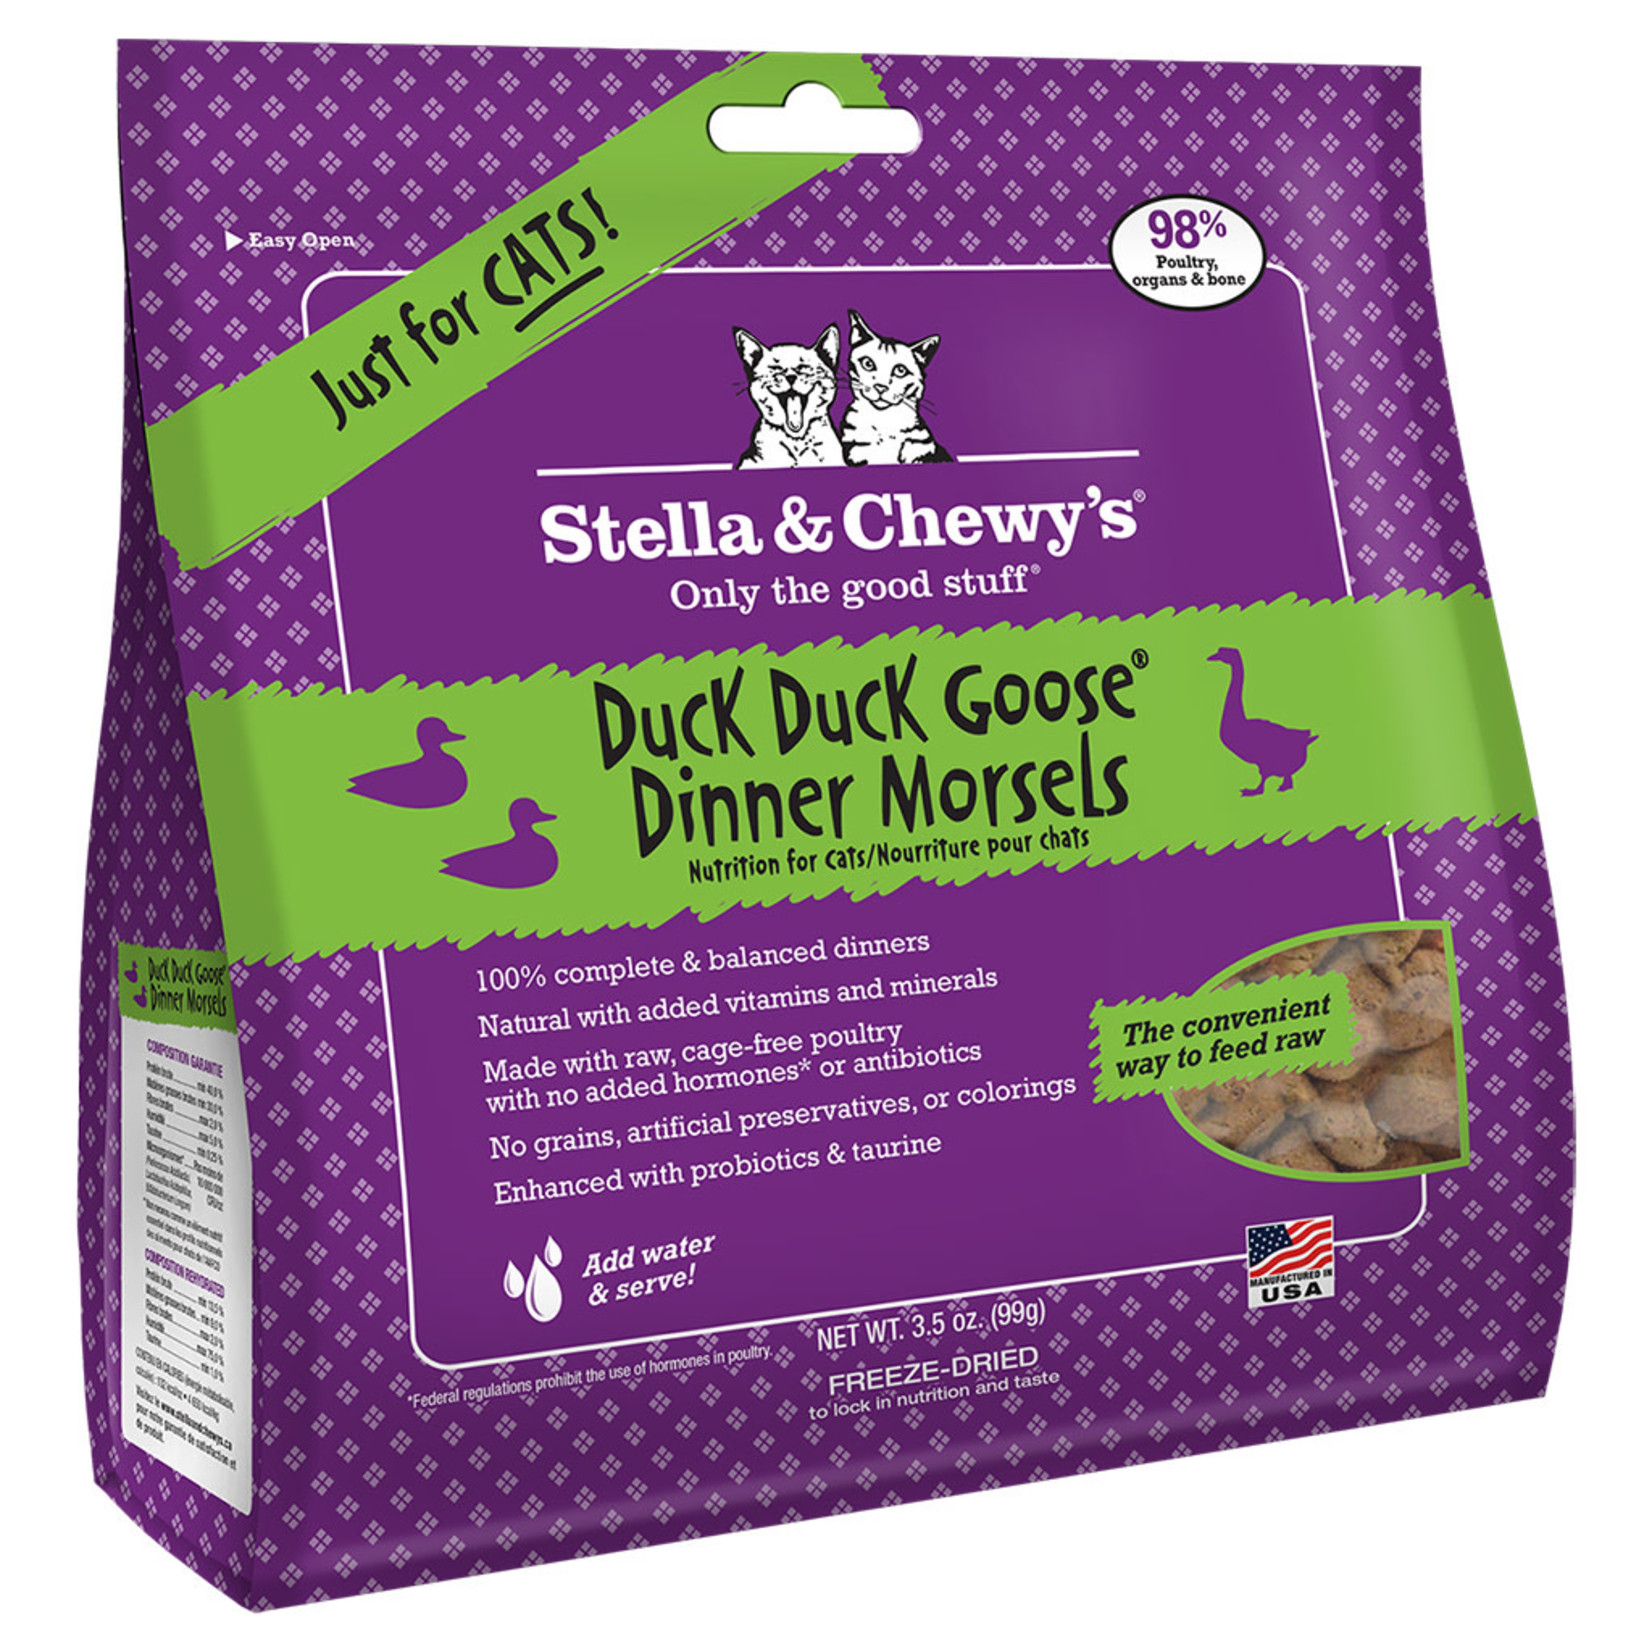 Stella & chewy's Stella & Chewy's FD Dinner Morsels Duck & Goose 3.5OZ Cat